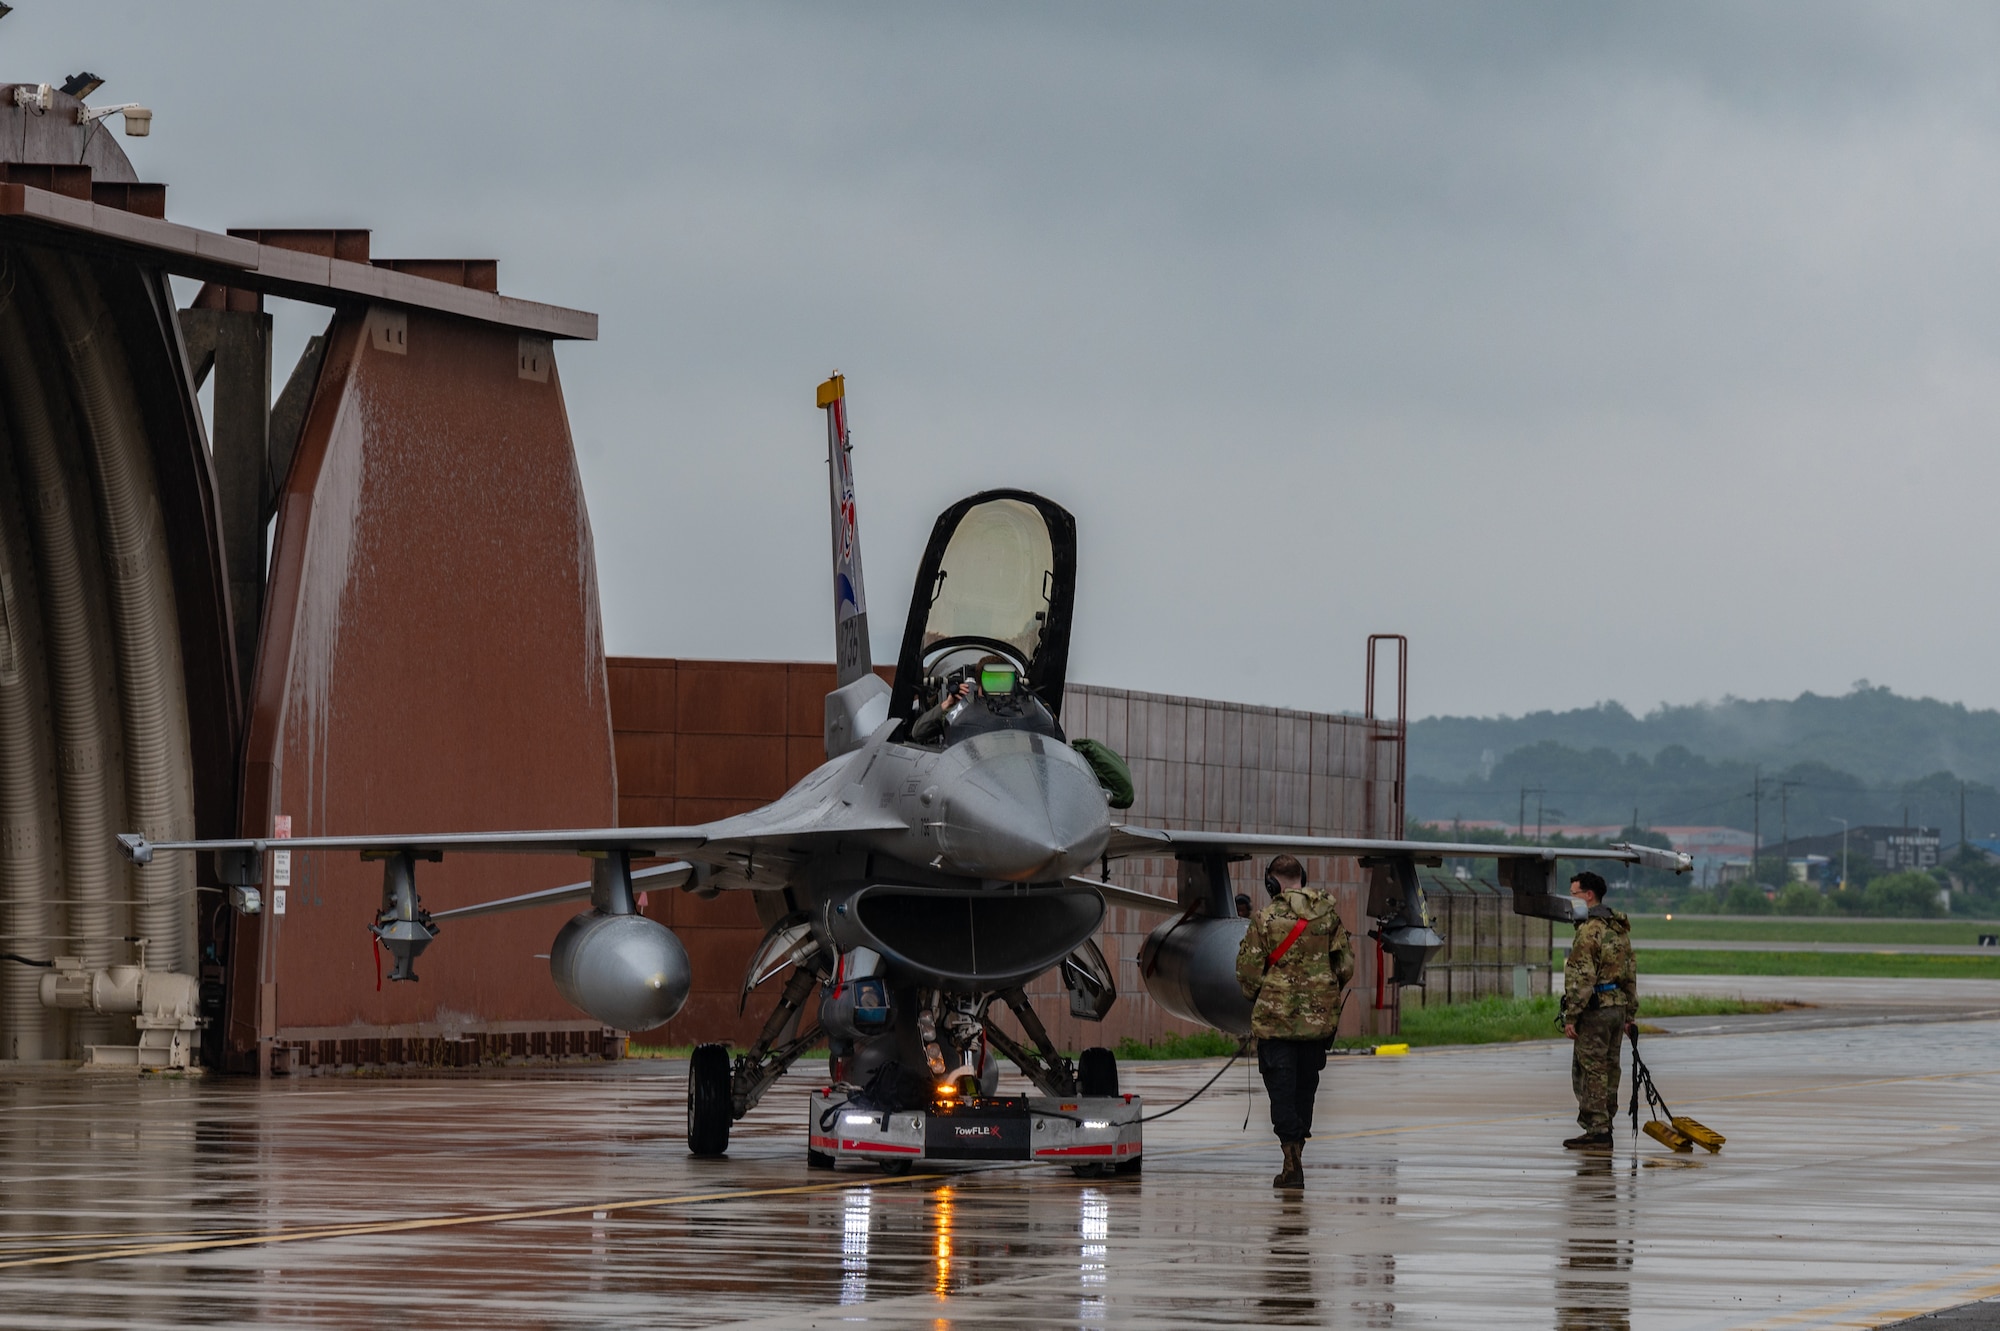 An F-16 fighter jet sits on a wet tarmac facing the camera from the left side of the plane with brown buildings on the left of the photo behind the jet. Two persons stands with their backs to the camera under the right wing of the aircraft.